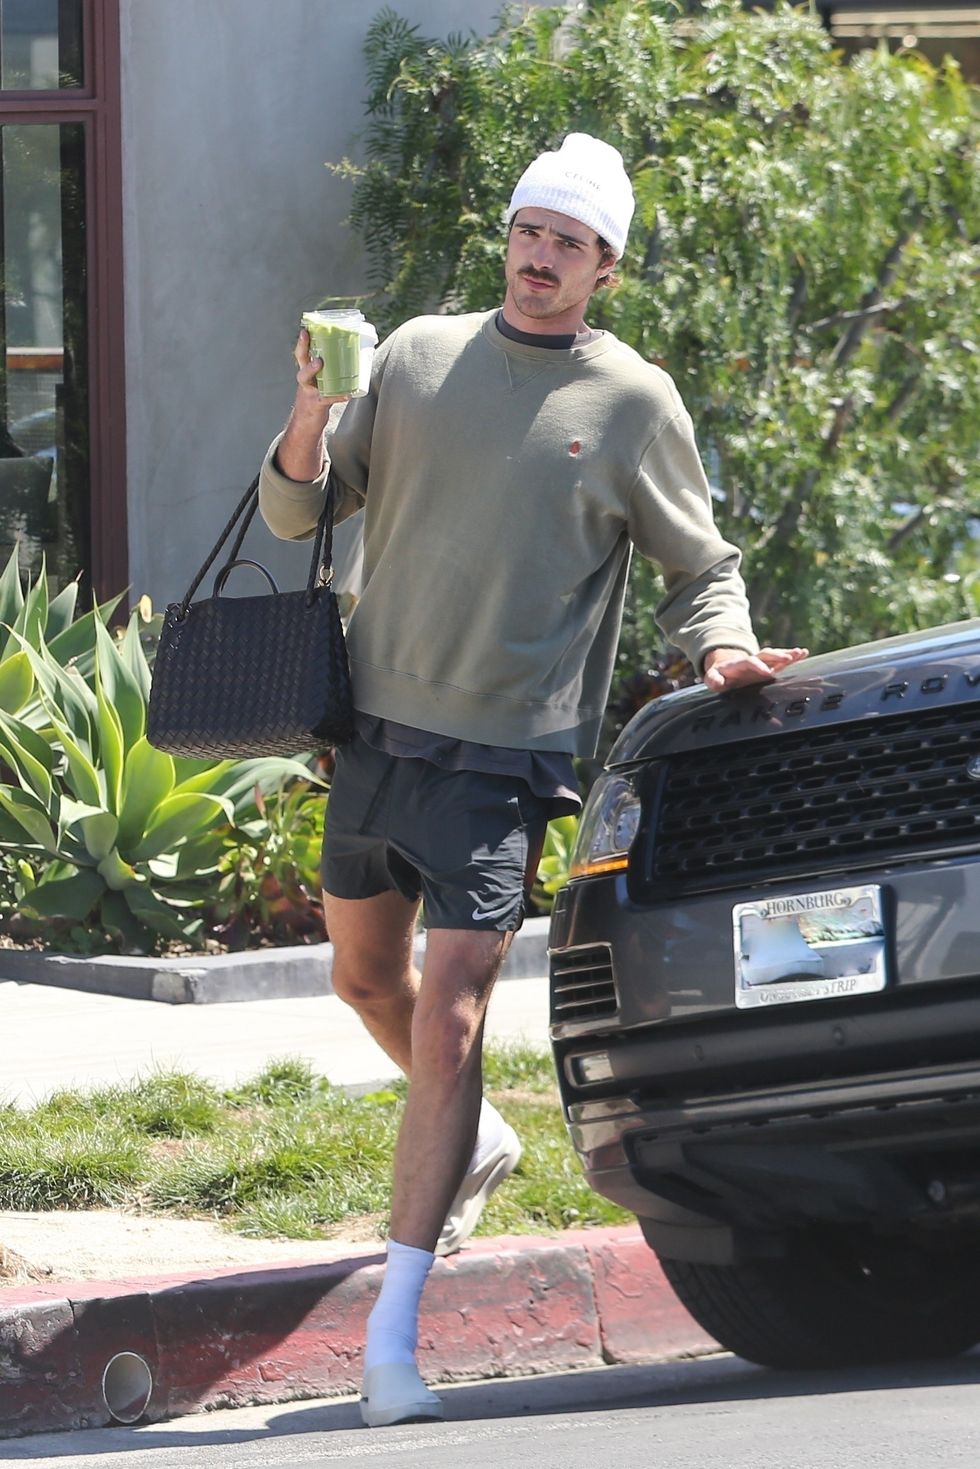 west hollywood, ca exclusive 'euphoria' star cob elordi stops for a few drinks at verve coffee pic with his dog jacob elordibackgrid usa 28 march 2023 usa 1 310 798 9111 usasalesbackgridcomuk 44 40208 ahead of print